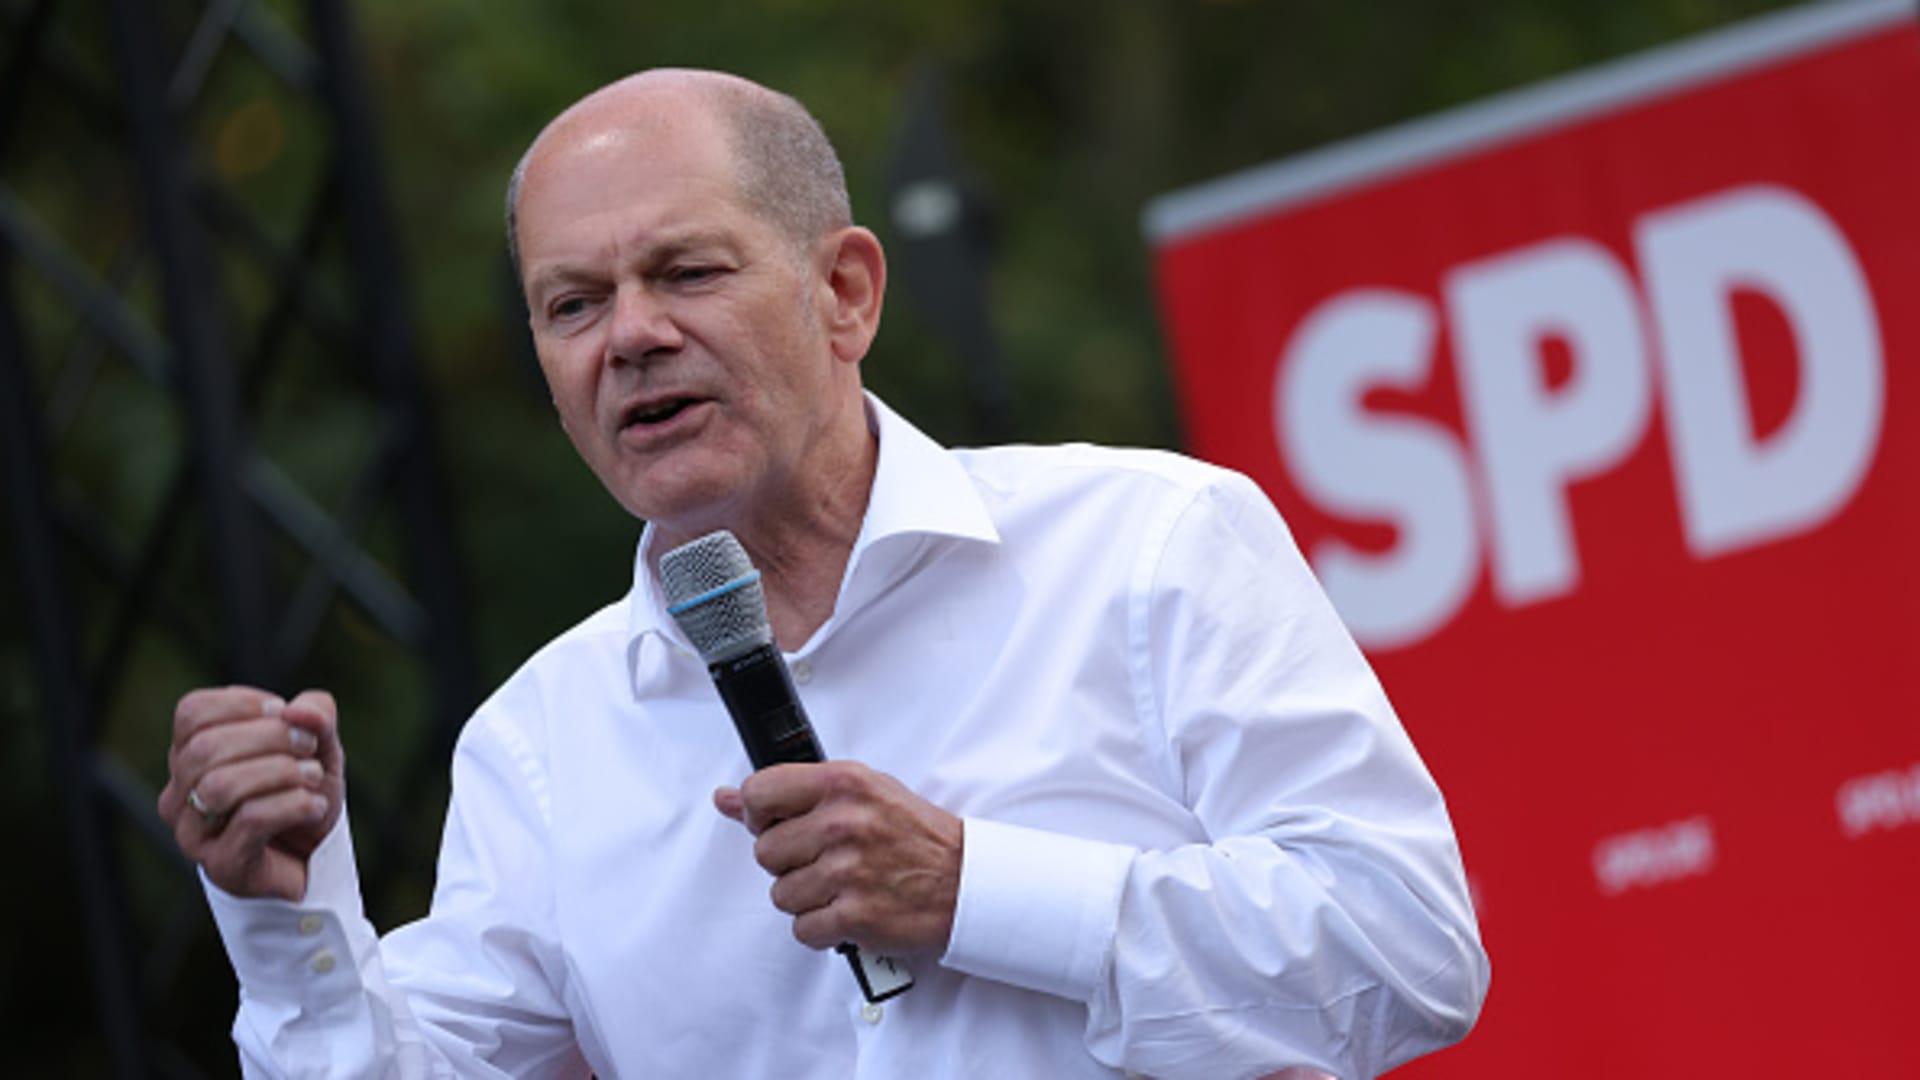 Olaf Scholz, chancellor candidate of the German Social Democrats (SPD), speaks at an election campaign rally on September 05, 2021 in Leipzig, Germany. Scholz currently has an ample lead over his main rival, Armin Laschet of the Christian Democrats (CDU/CSU), ahead of federal parliamentary elections scheduled for September 26.